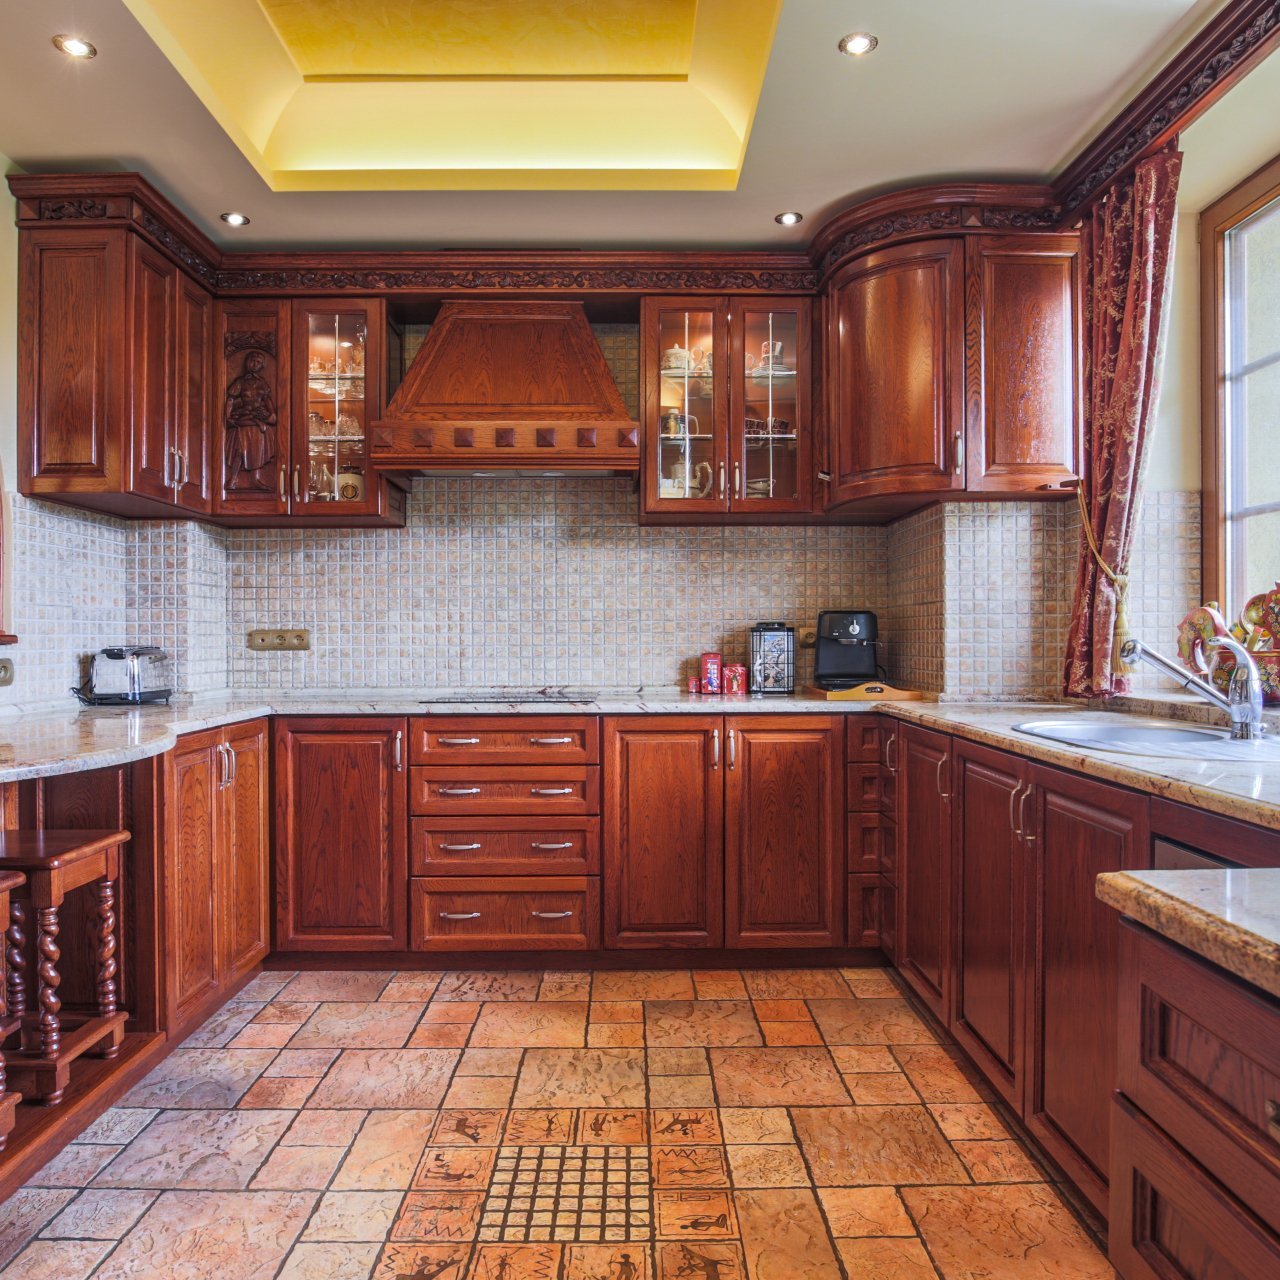 A kitchen with wooden cabinets and a tiled floor